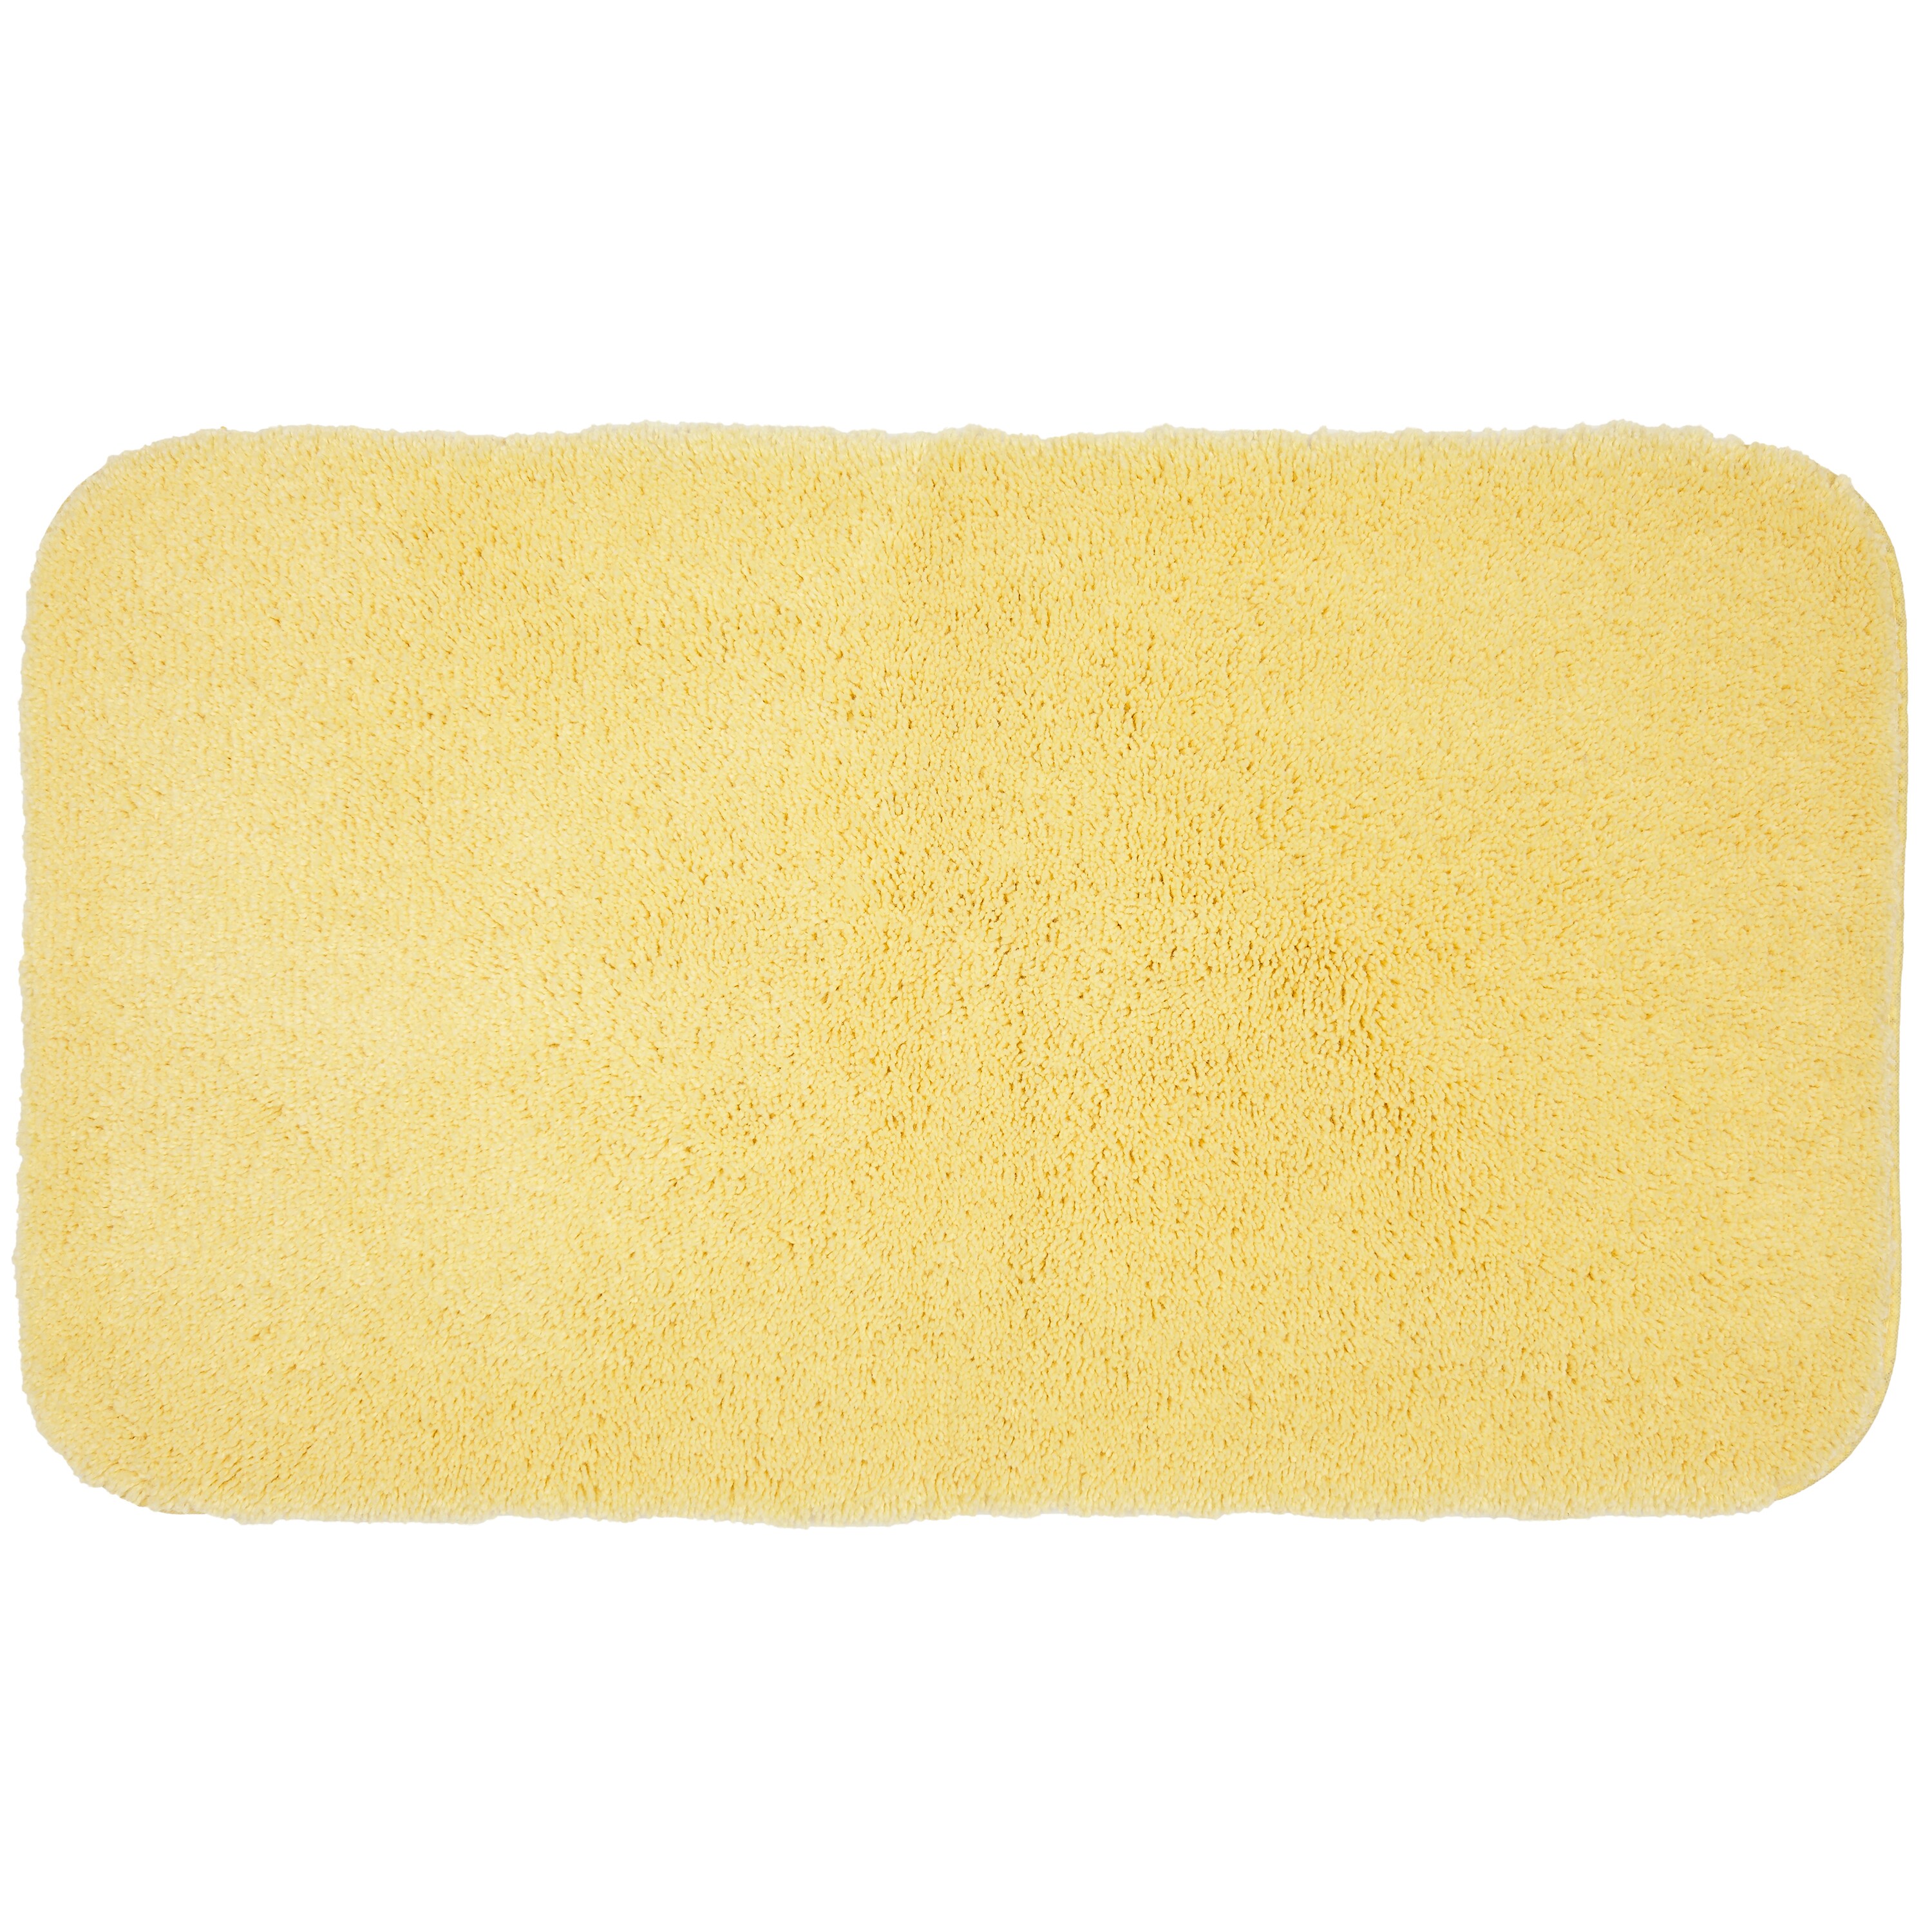 34in x 20in Mohawk - Pure Perfection Linen Bath Rug